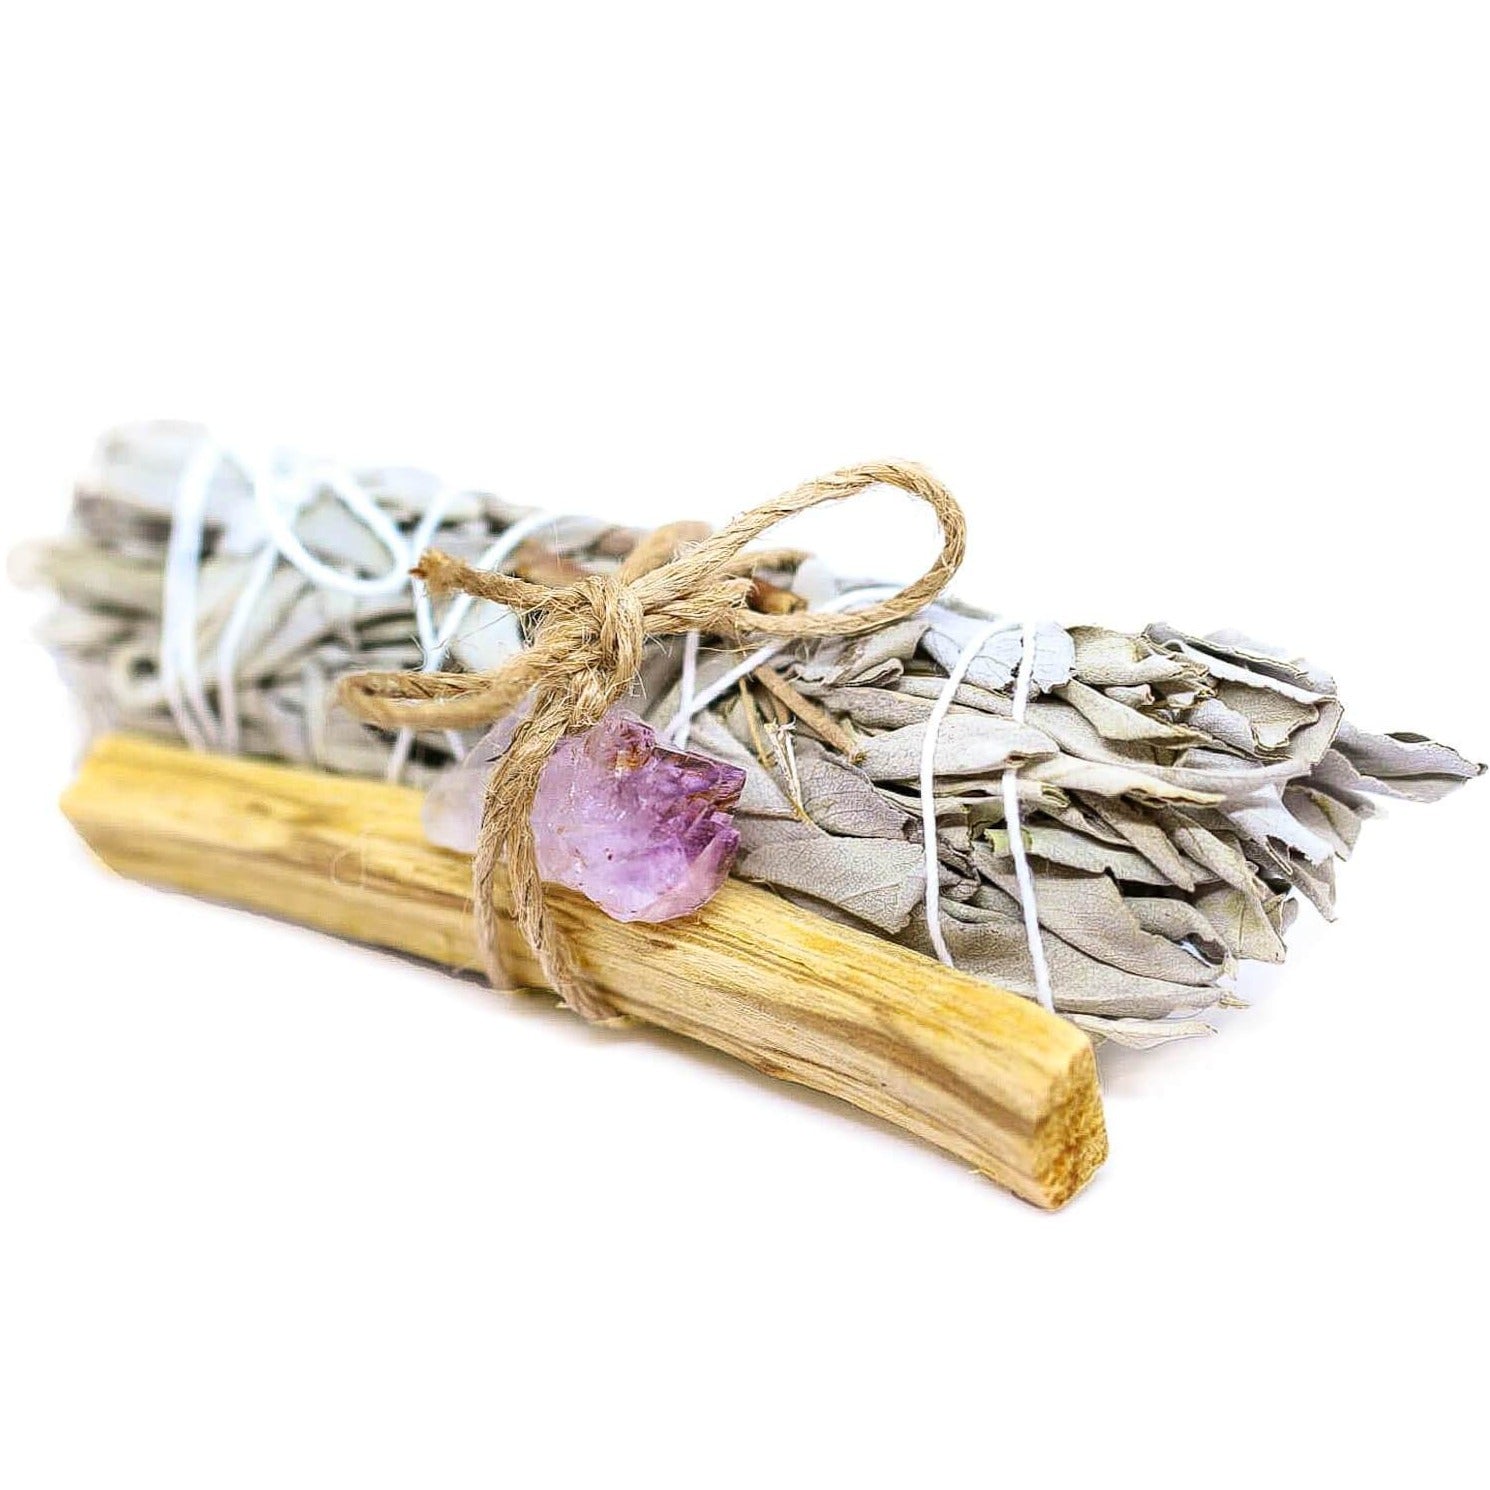 Looking for, where can I buy White Sage, Palo Santo sticks, and amethyst? Shop at Magic Crystals for Amethyst Smudge Bundle - Palo Santo - White Sage - Amethyst - Space Clearing - Home Cleansing Kit - Calming Smudge Bundle - Meditation. Smudging for Cleansing and Clearing Your Home, Clearing Negative Energy. 